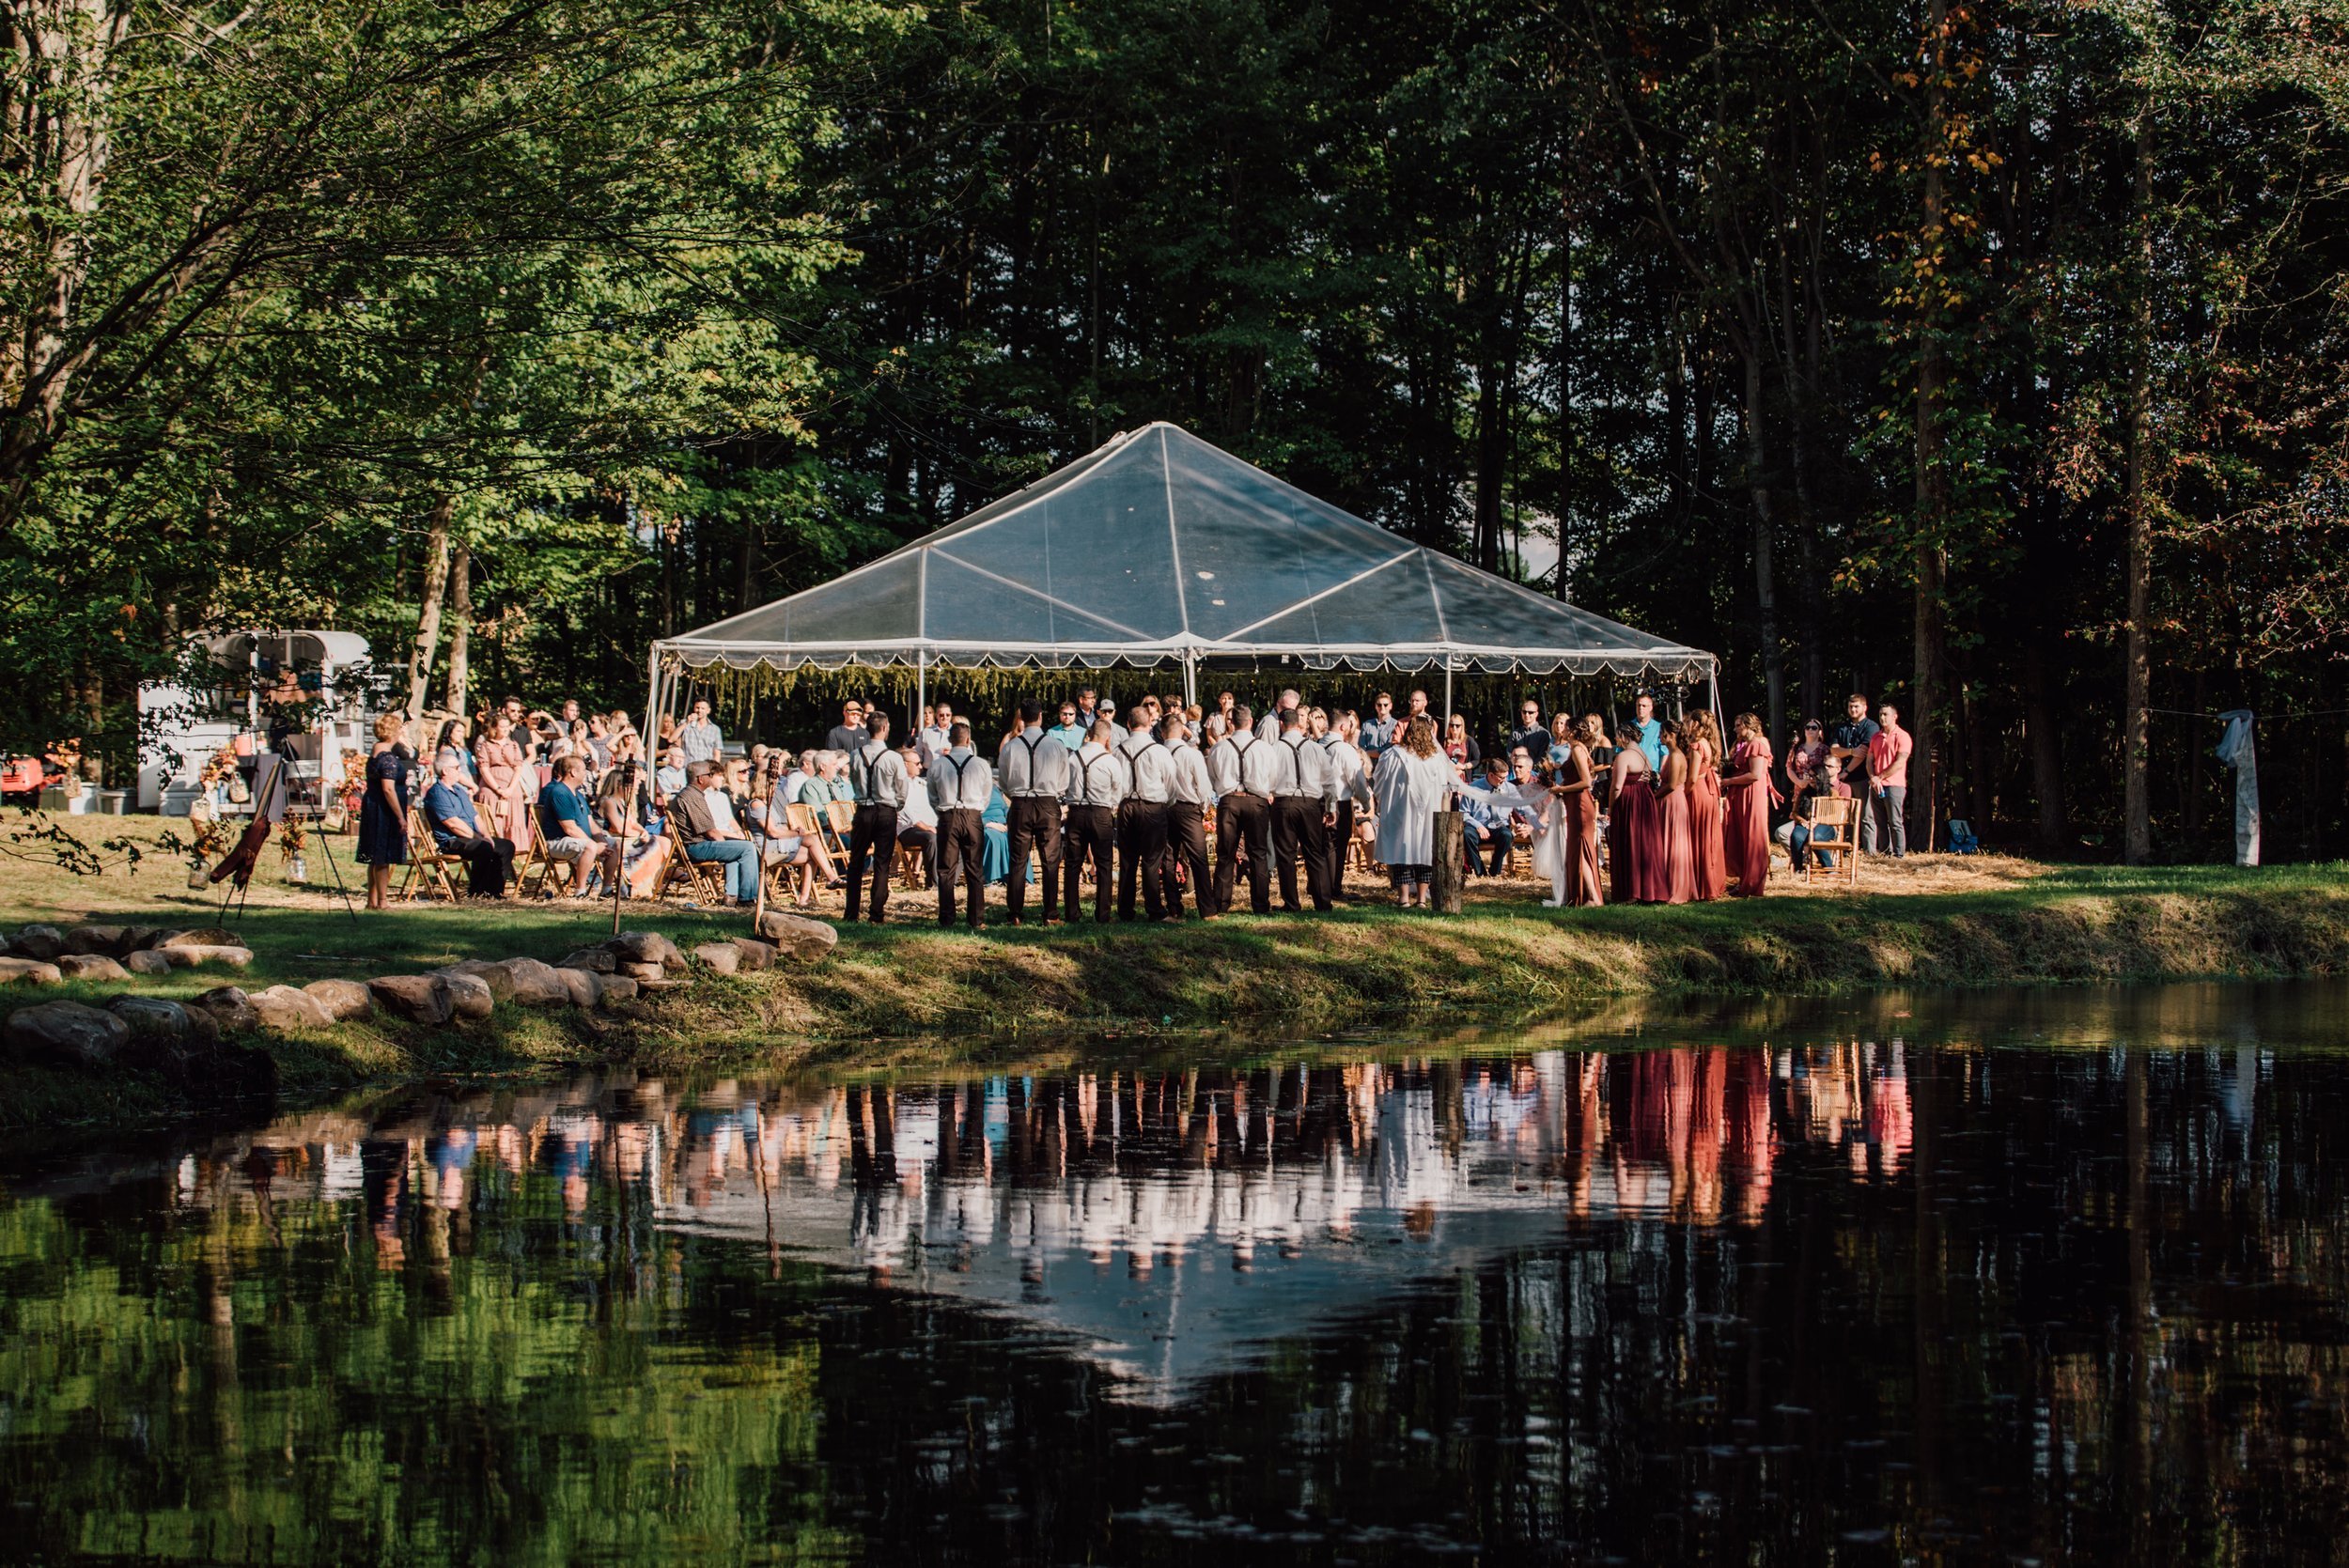  view from behind the outdoor fall wedding ceremony across a pond reflecting the image of the wedding party back  